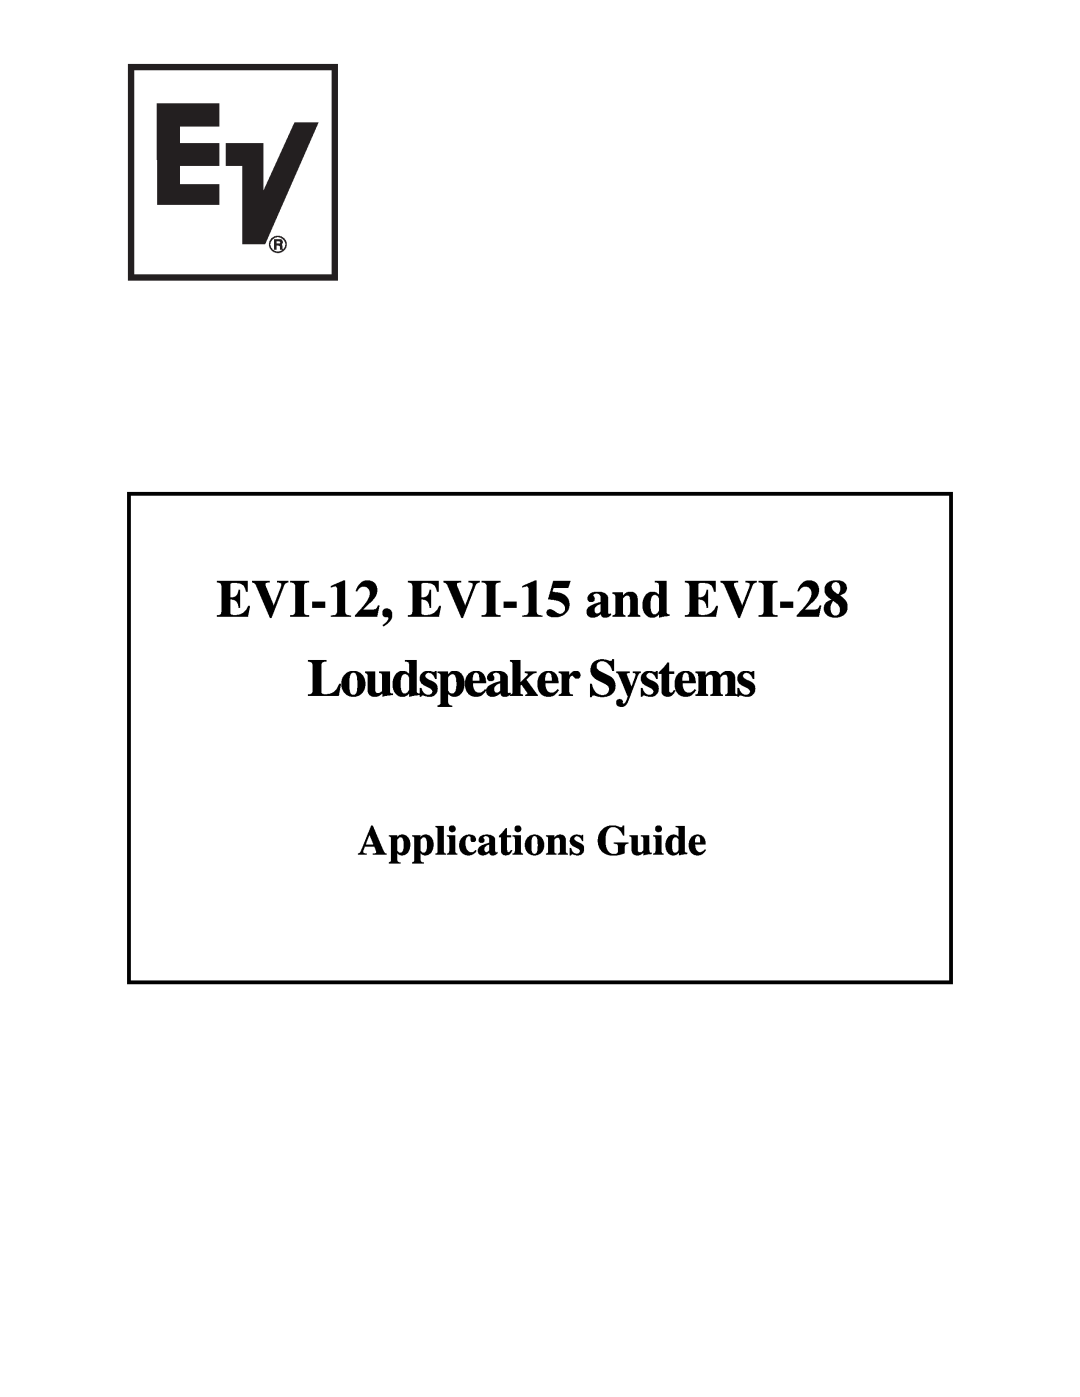 Electro-Voice EVI-15, EVI-28 manual EVI-12, EVI-15and EVI-28, Loudspeaker Systems, Applications Guide 